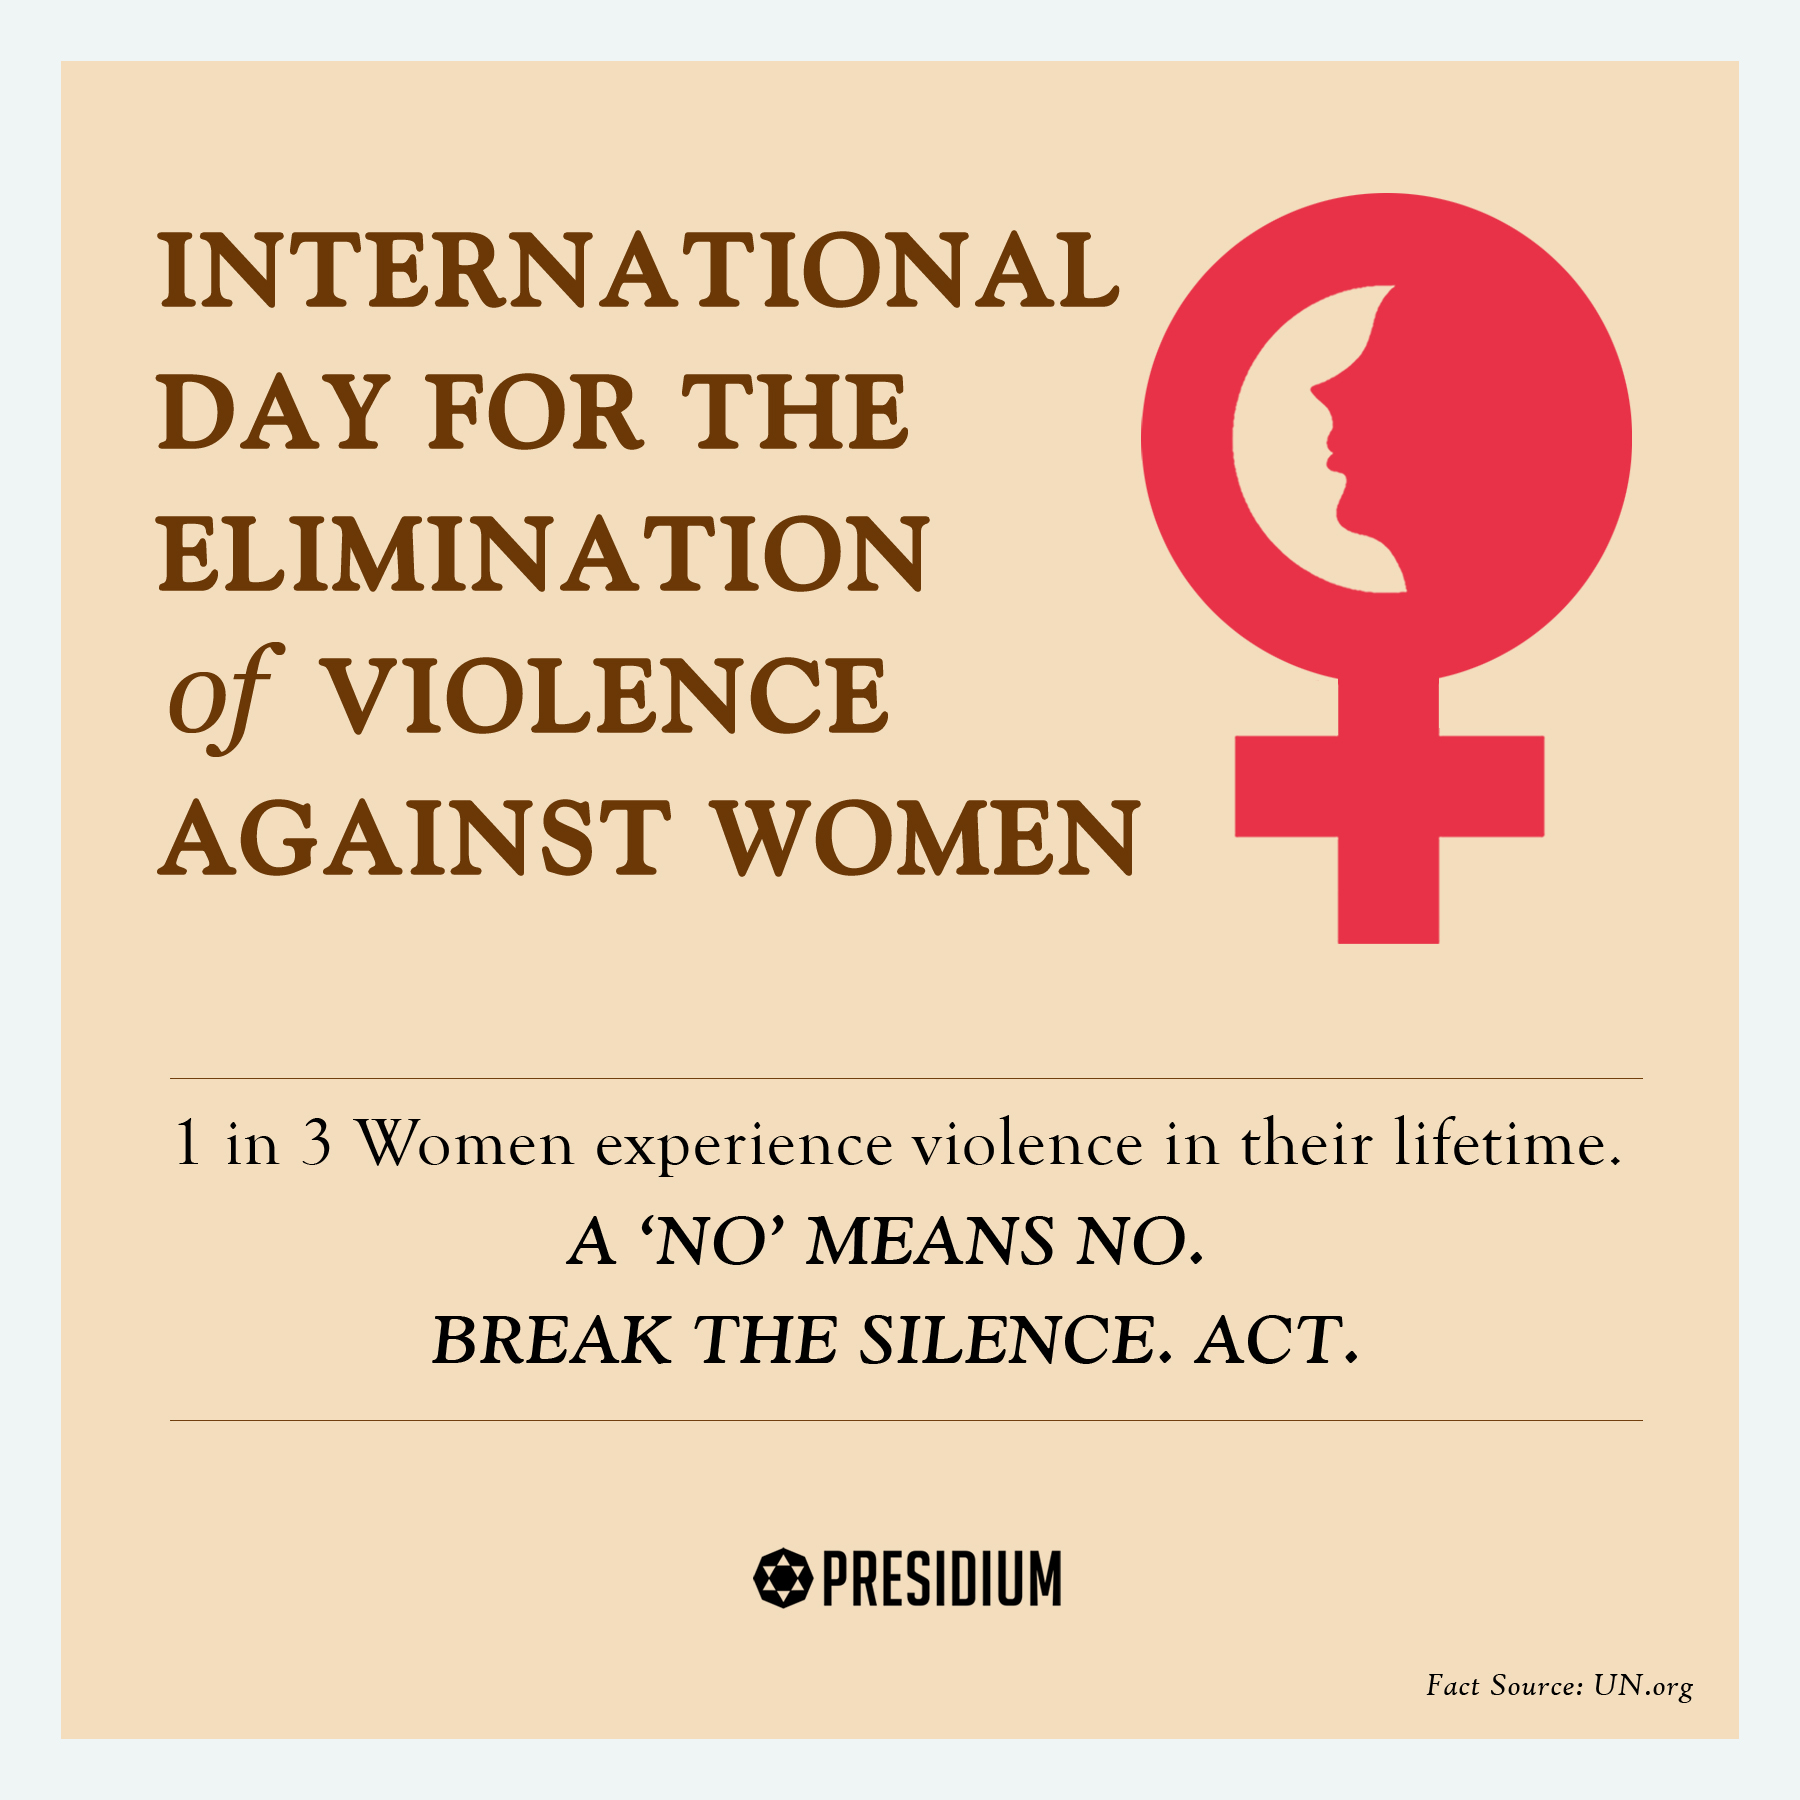 LET'S STAND UP, SPEAK OUT & ACT TO PREVENT VIOLENCE AGAINST WOMEN